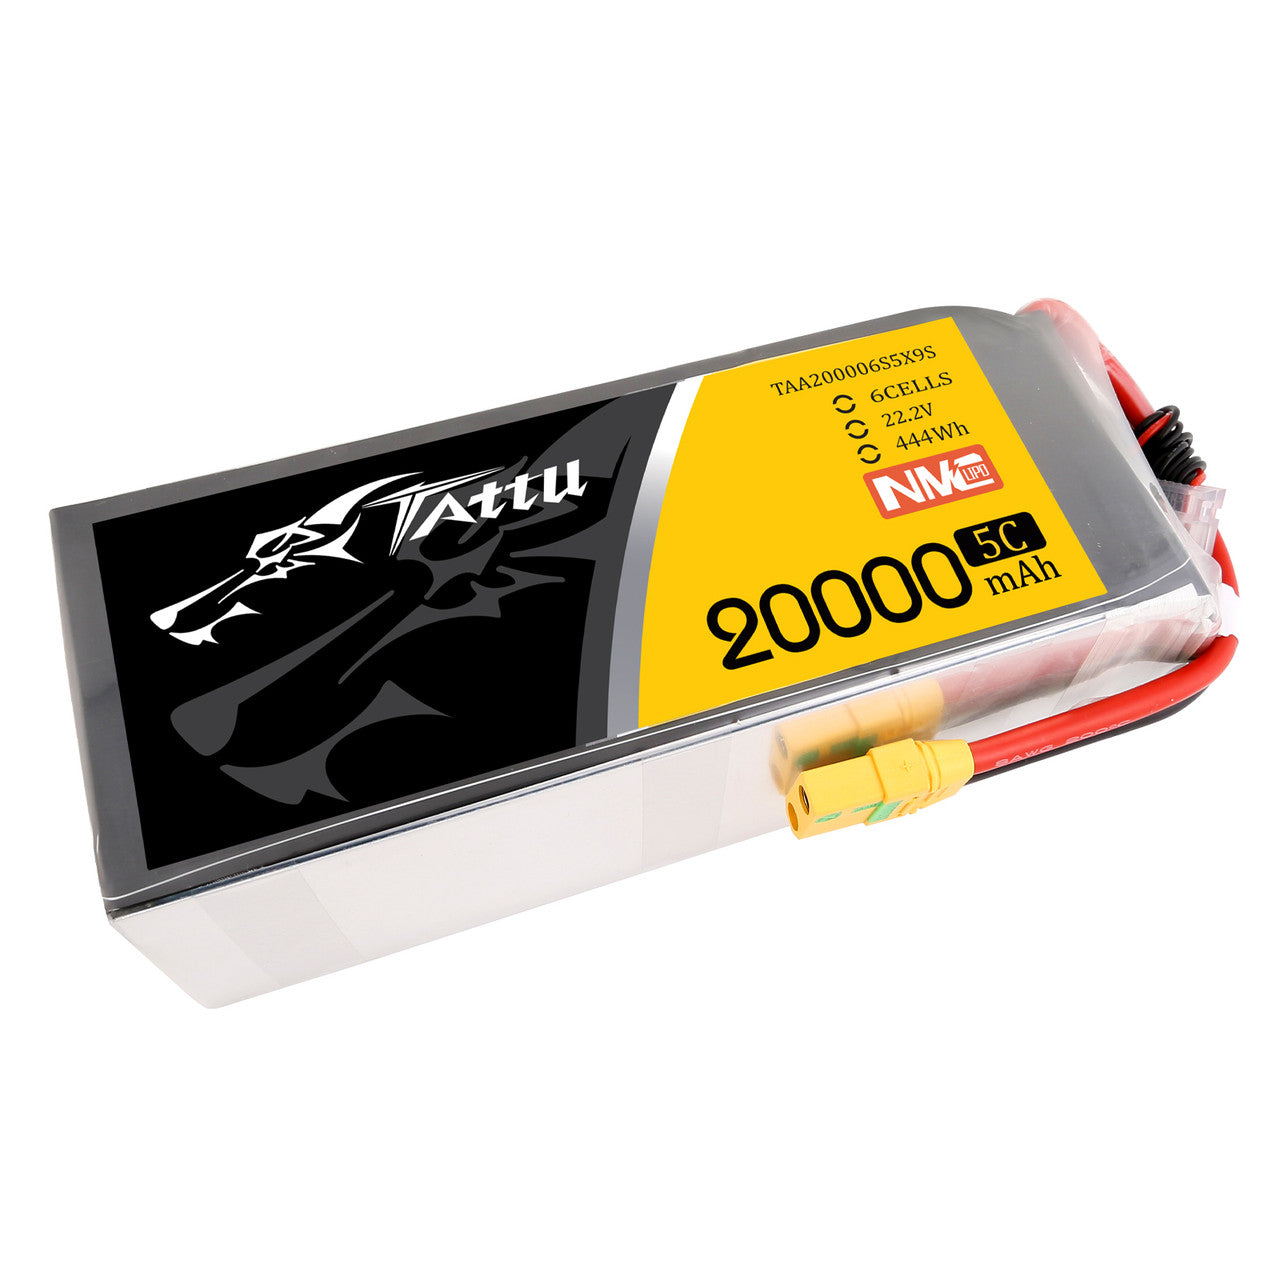 Tattu NMC 20000mAh 6s 5C 22.2V Lipo Battery, High-capacity 20000mAh lithium-ion battery pack with XT90S plug, suitable for power-hungry devices.